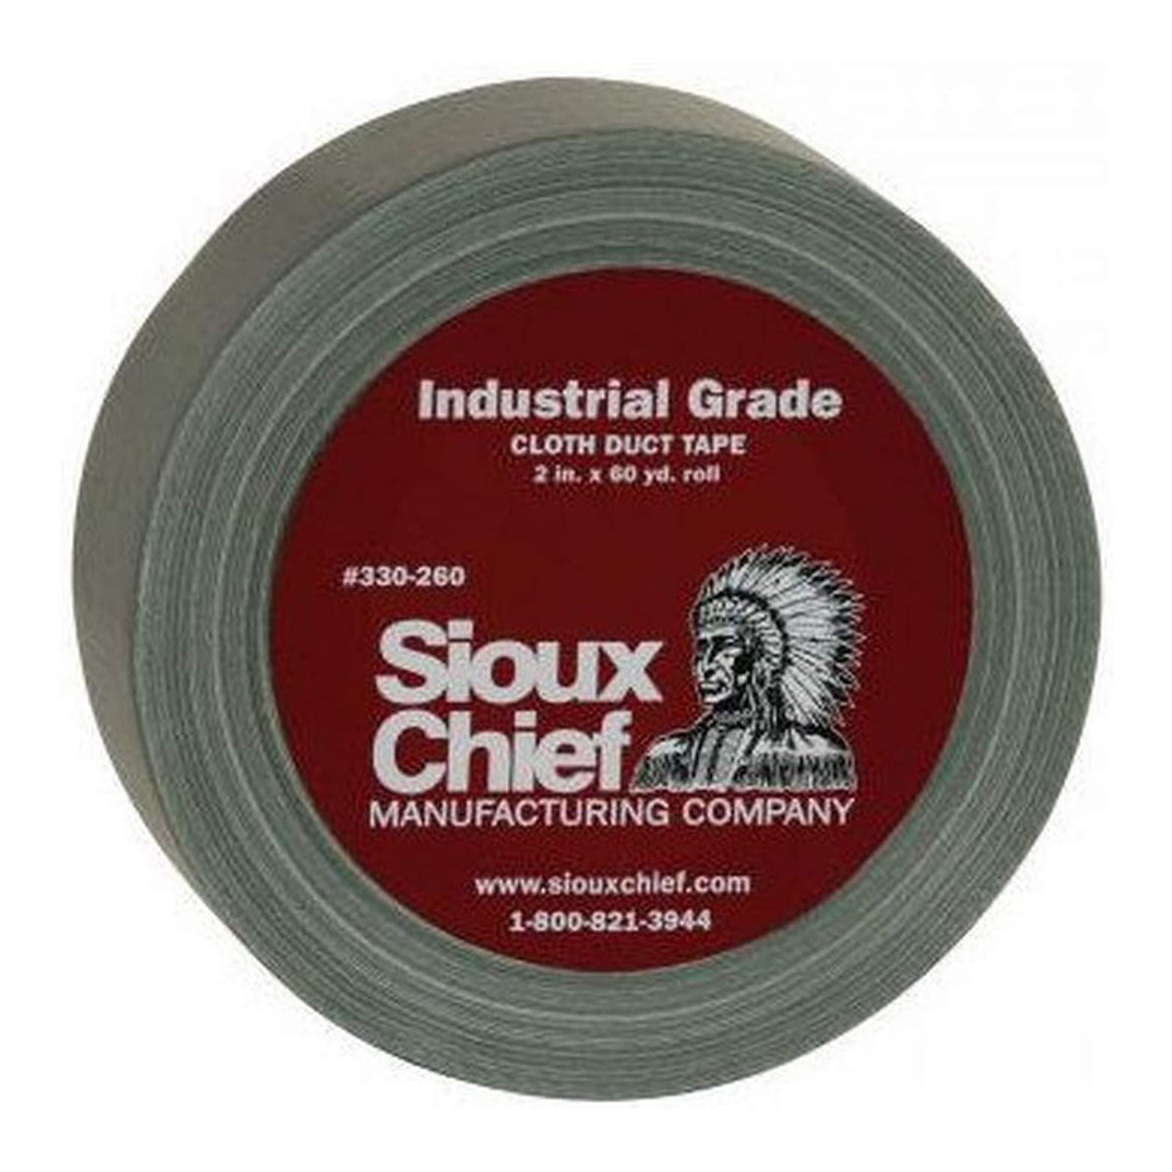 TAPE 2" X 60 YD DUCT - 330-260 INDUSTRIAL GRADE